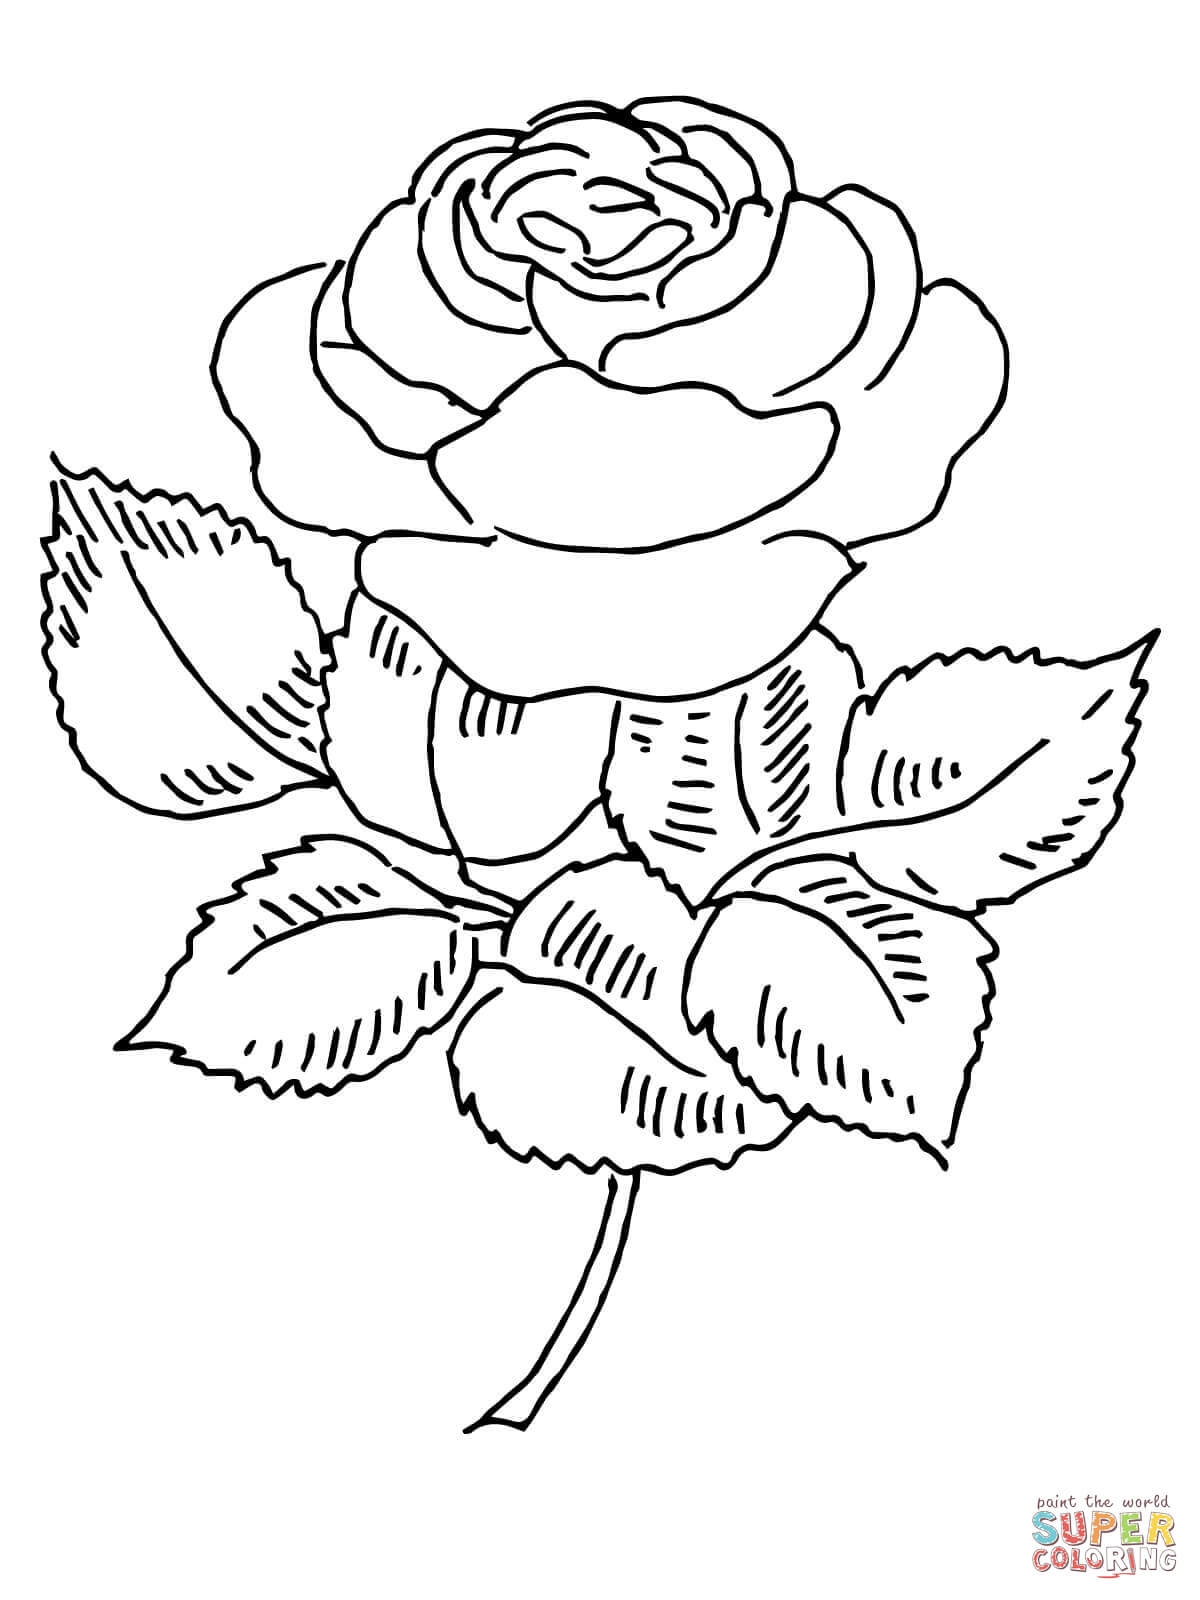 Free Printable Colouring Pages For The Elderly